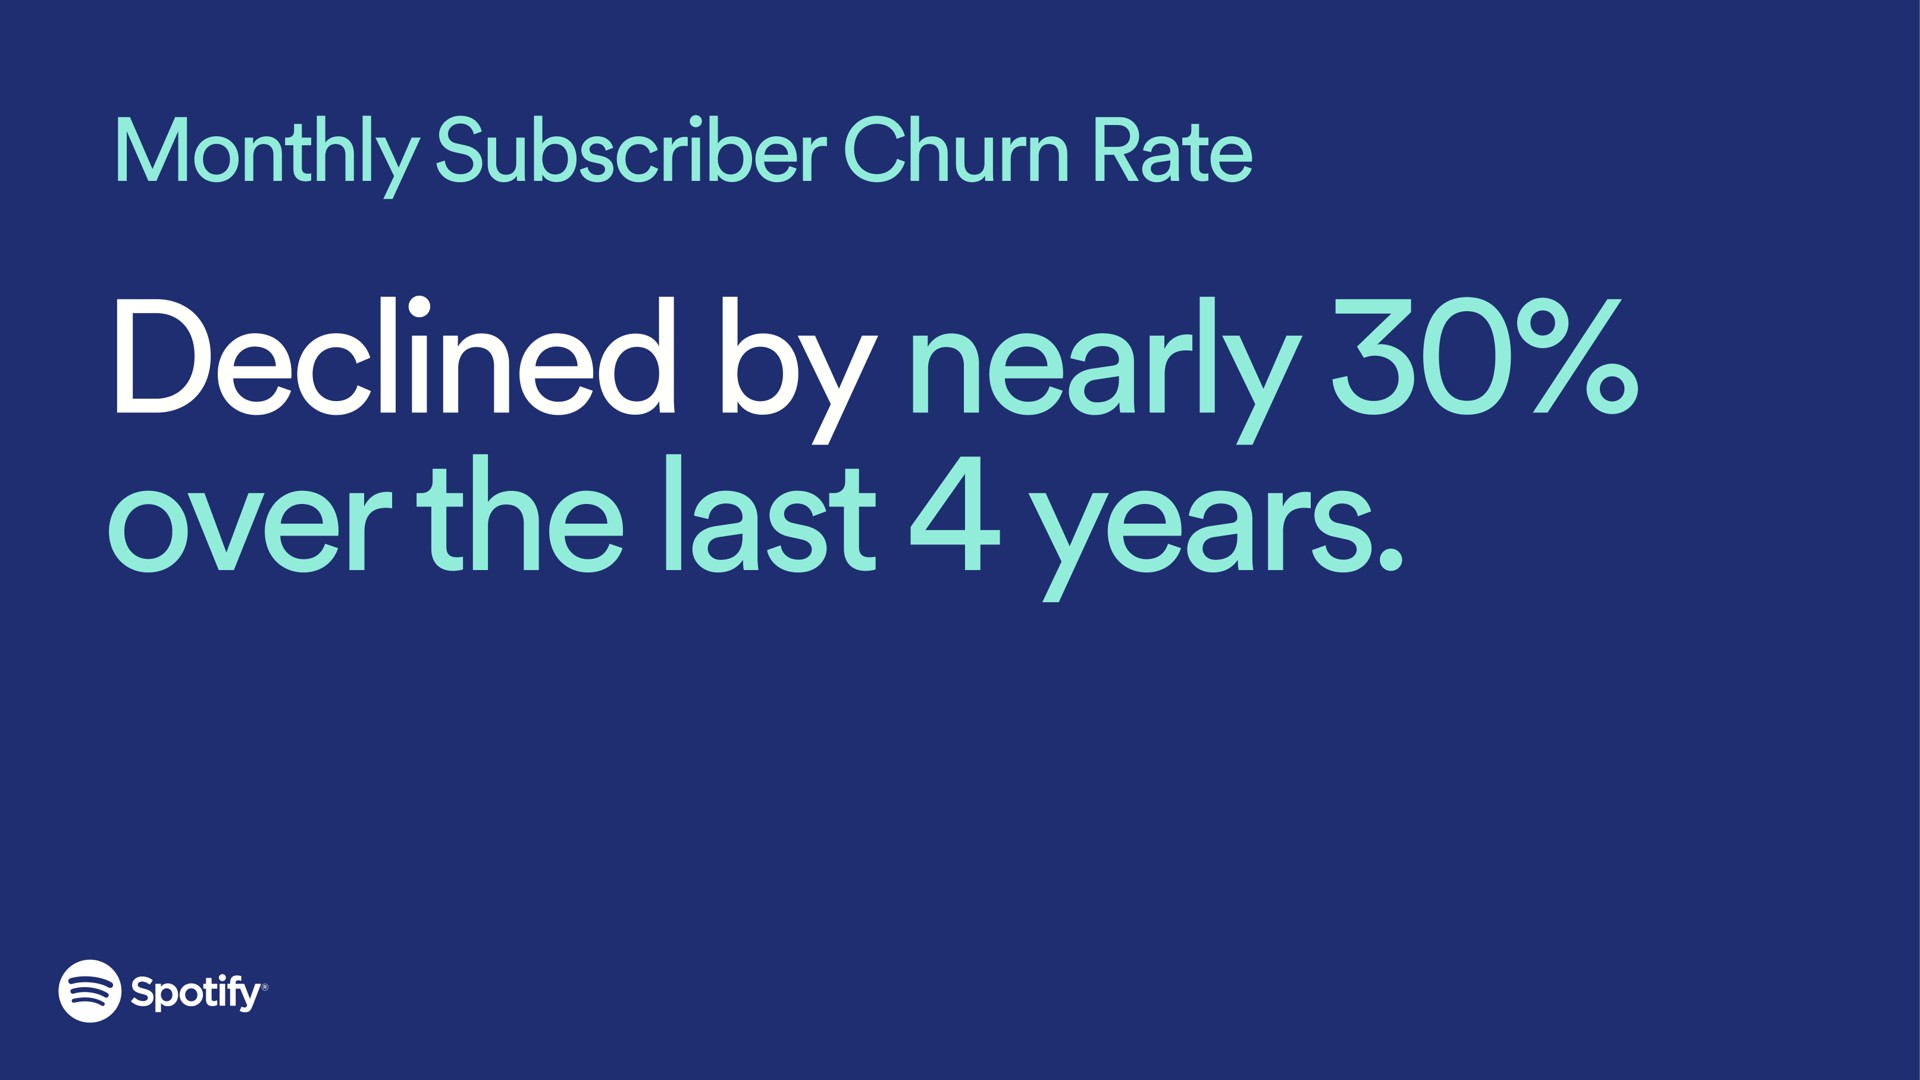 monthly subscriber churn rate declined by nearly over the last years | Spotify